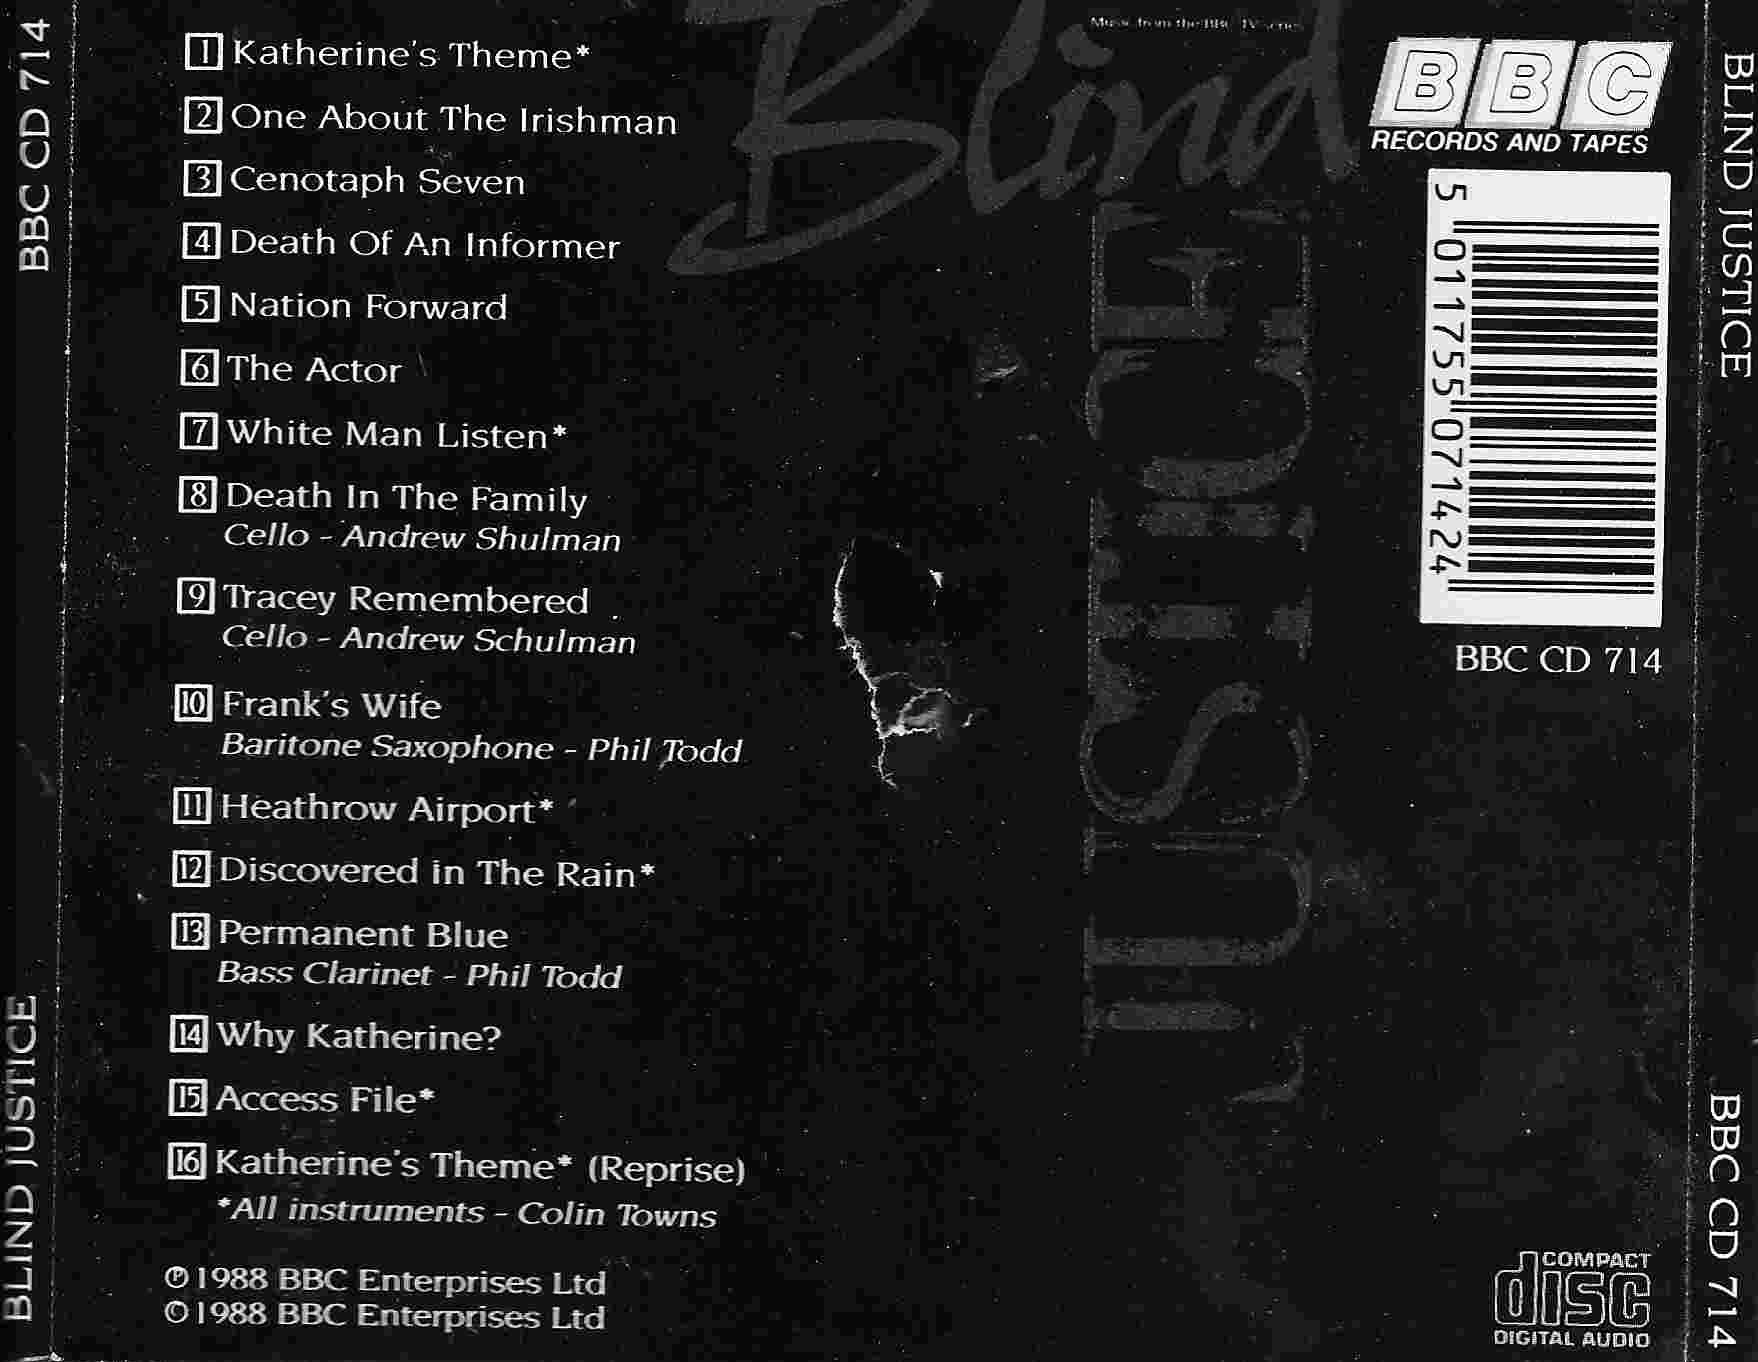 Back cover of BBCCD714